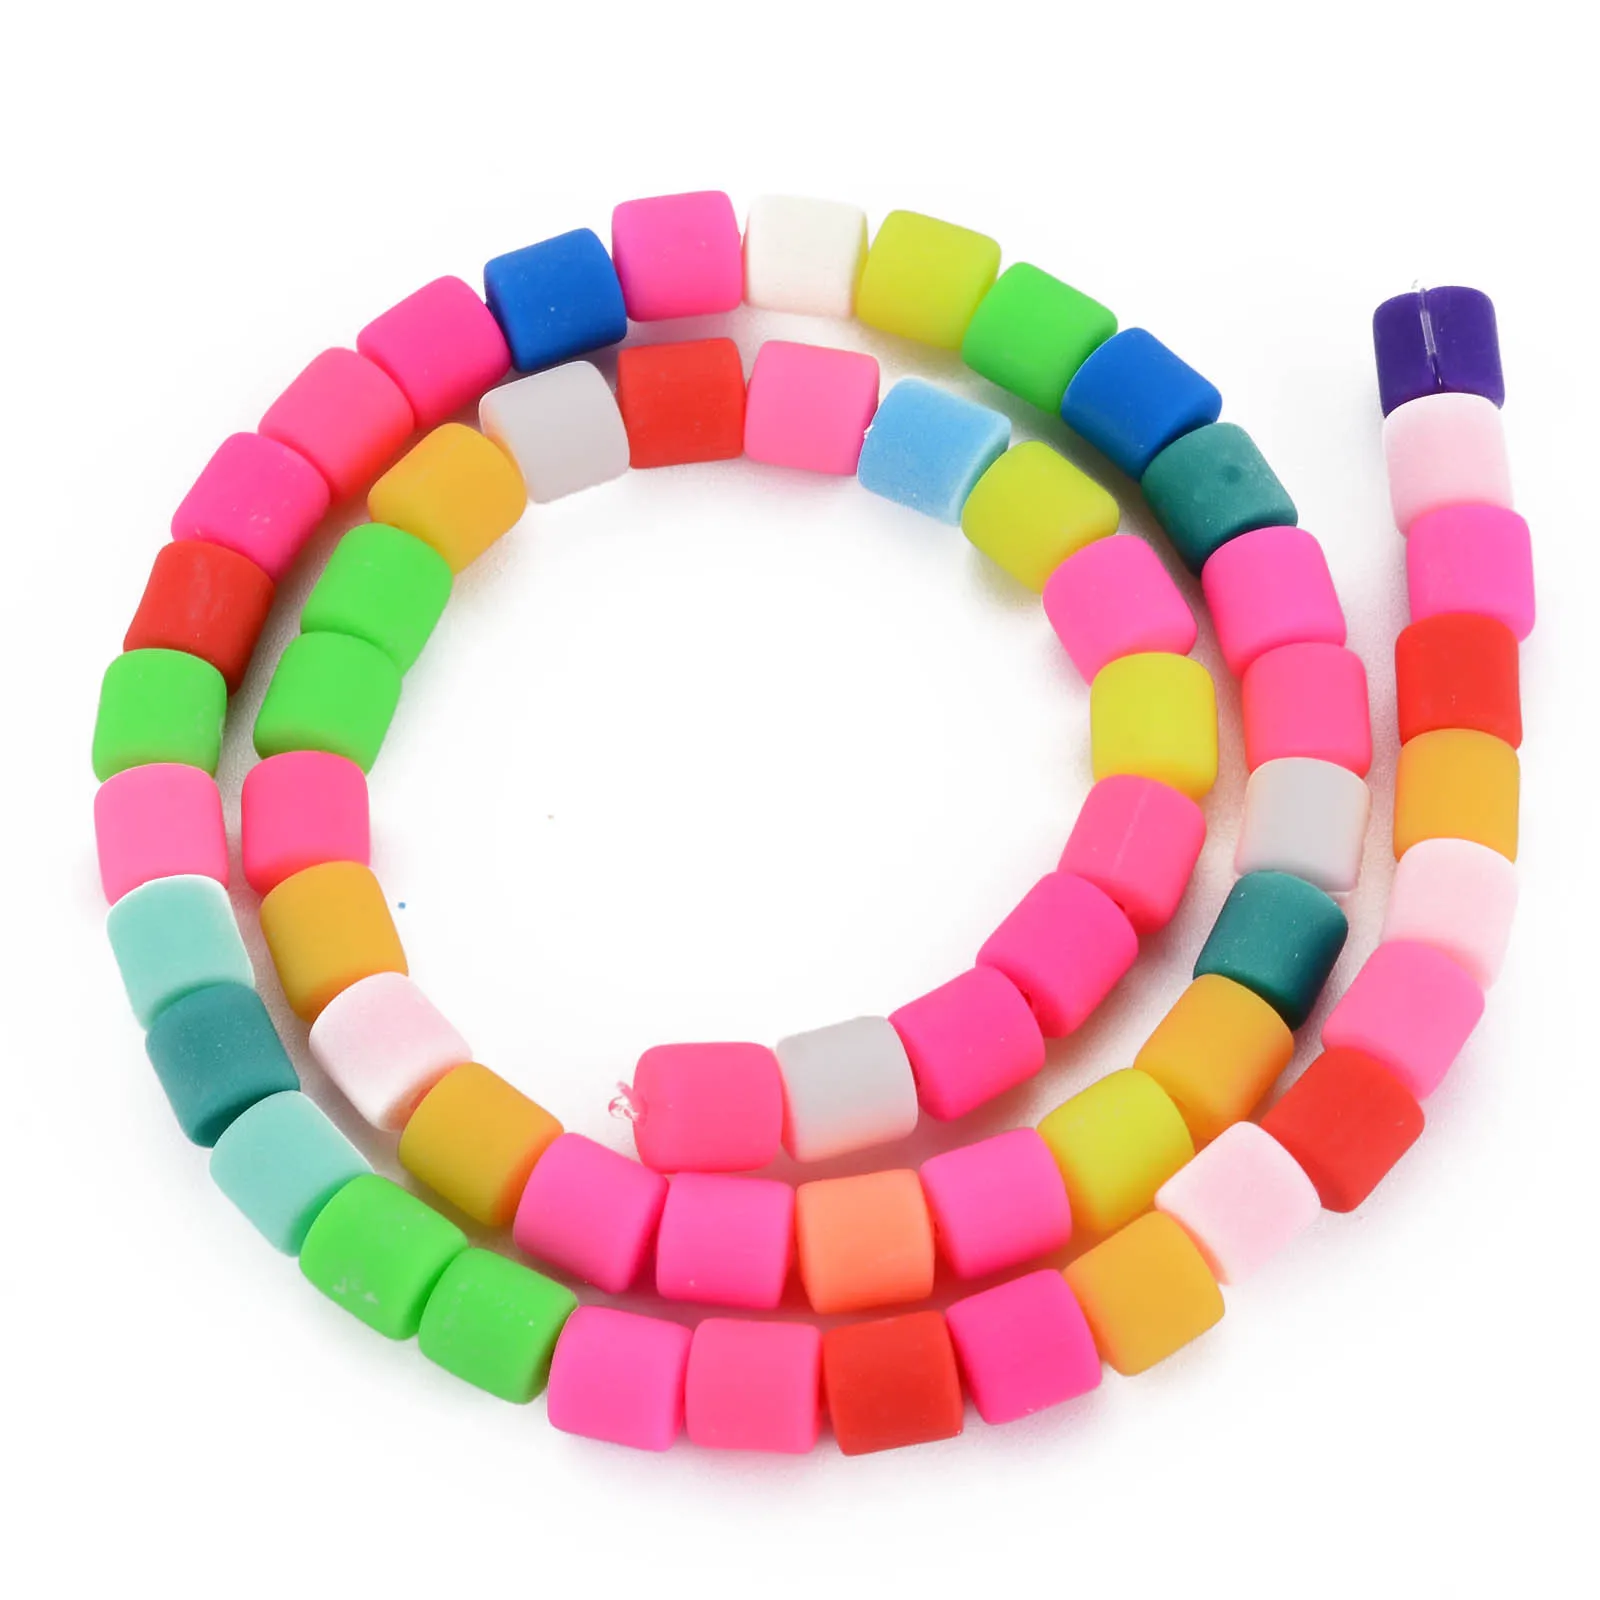 

10 Strands 6mm Handmade Polymer Clay Bead Strands Column Loose Spacer Beads For DIY Bracelet Necklace Craft Jewelry Making